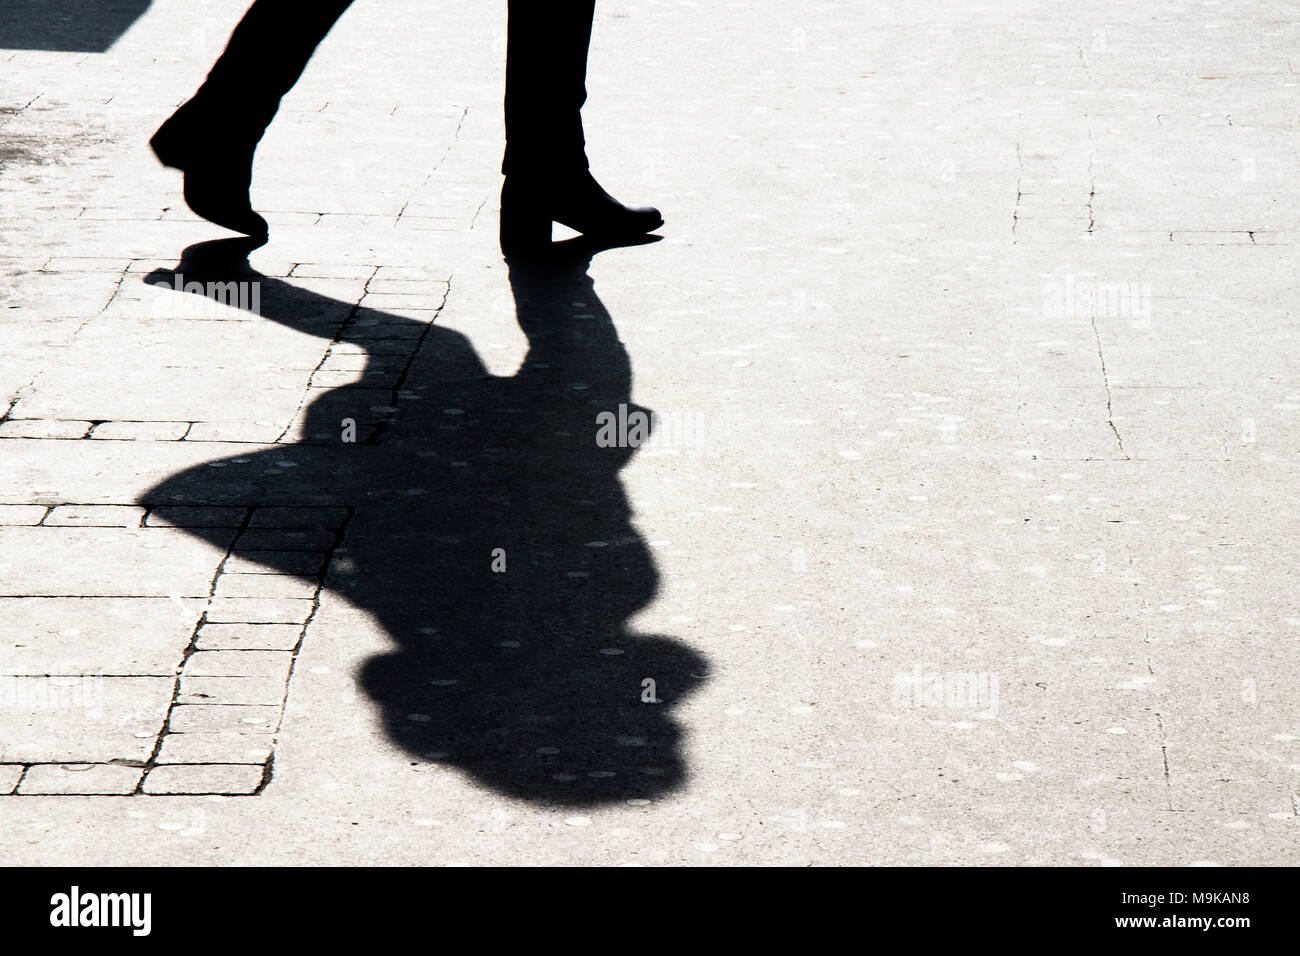 Silhouette shadow of woman legs walking city street in black and white Stock Photo